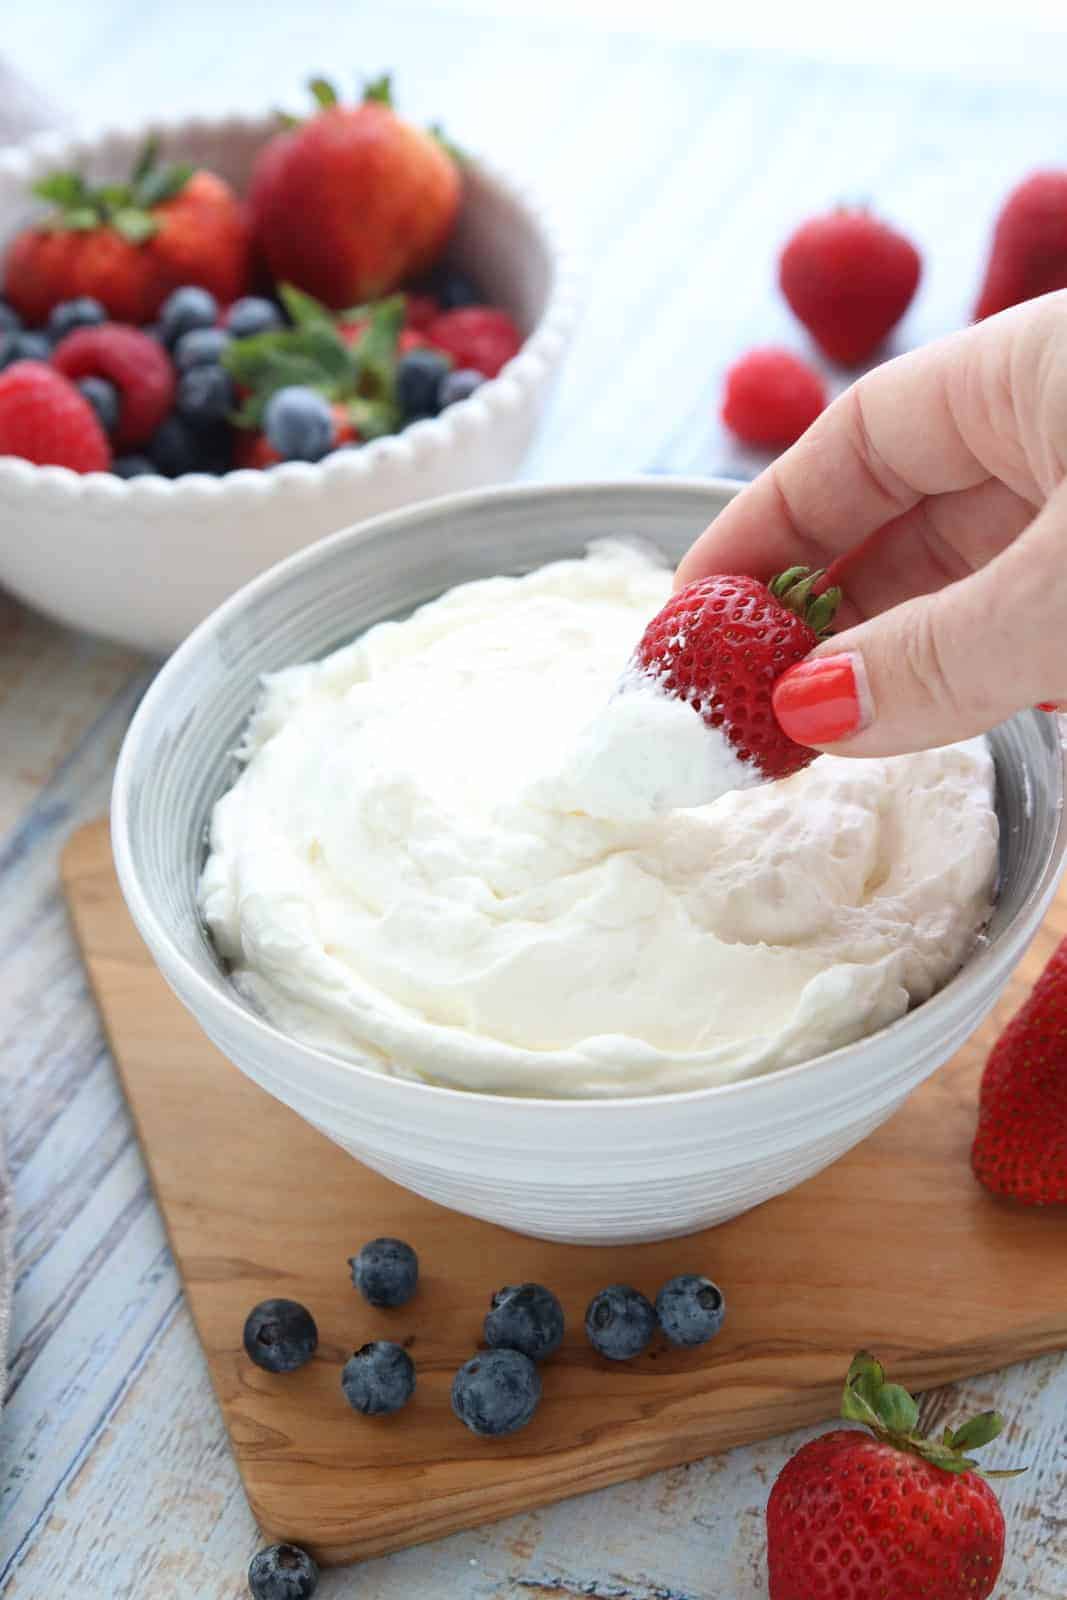 Long lasting whipped cream shown with berries being dipped in the bowl of whipped cream that's sitting on a wooden surface.